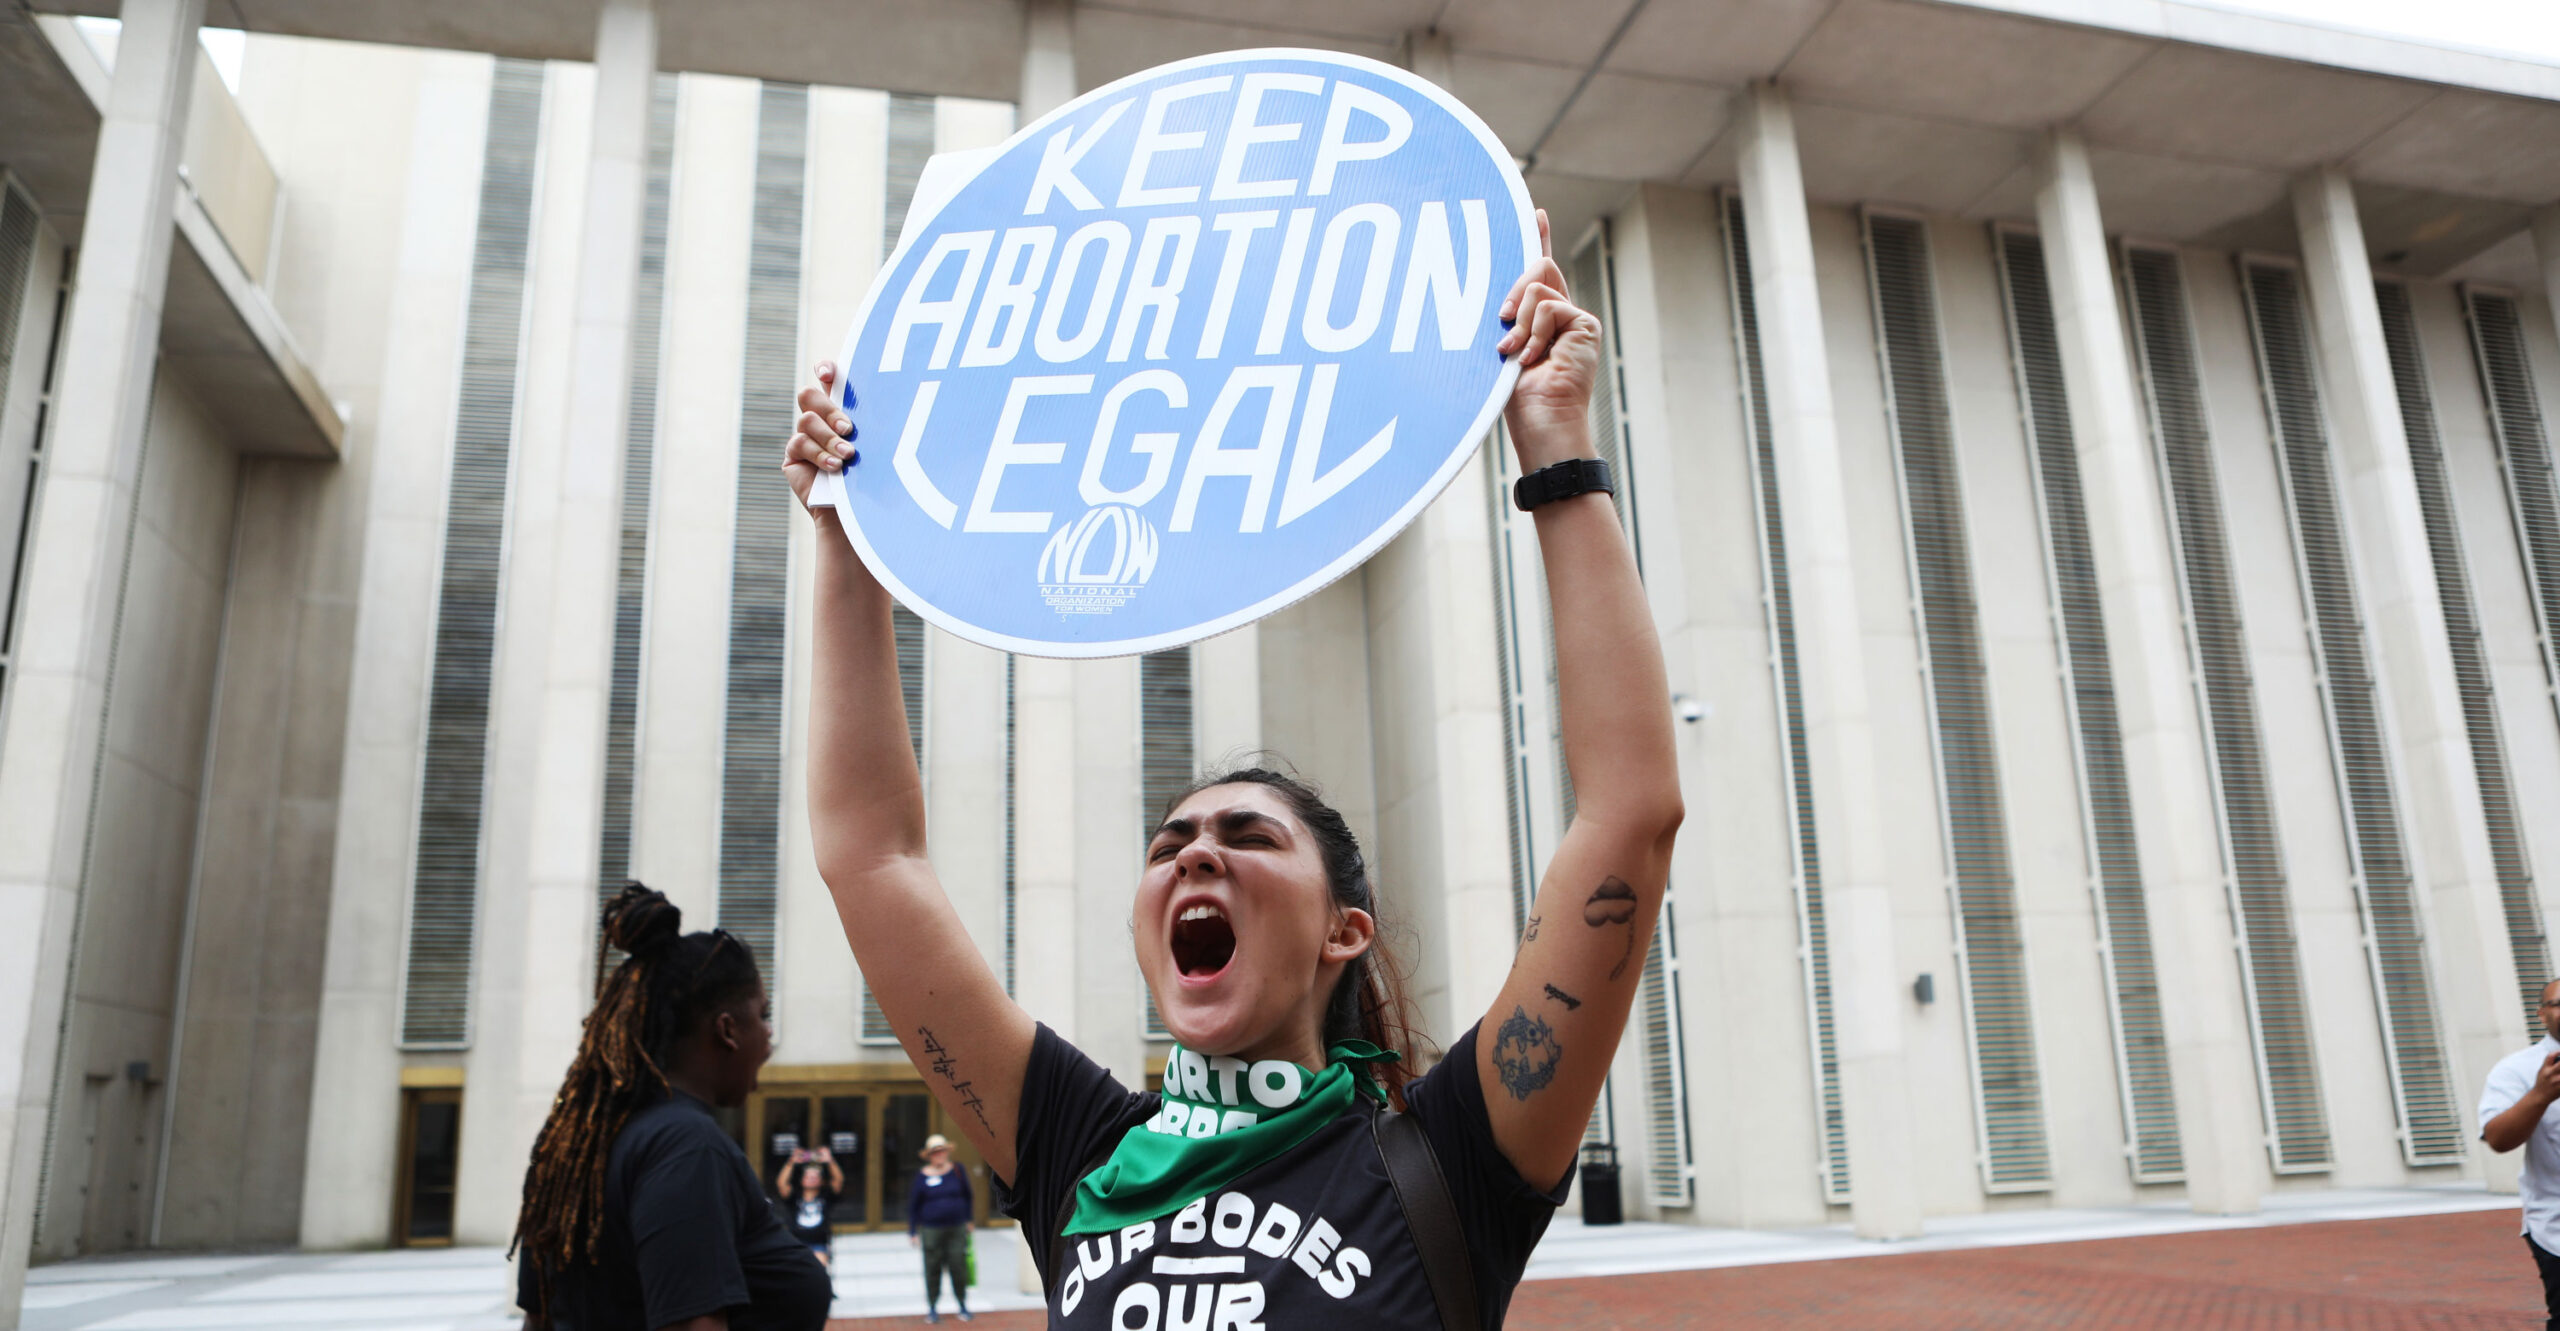 Pro-Abortion Ballot Initiative in Florida Aims to Trick Voters With Vague Definition of 'Health'